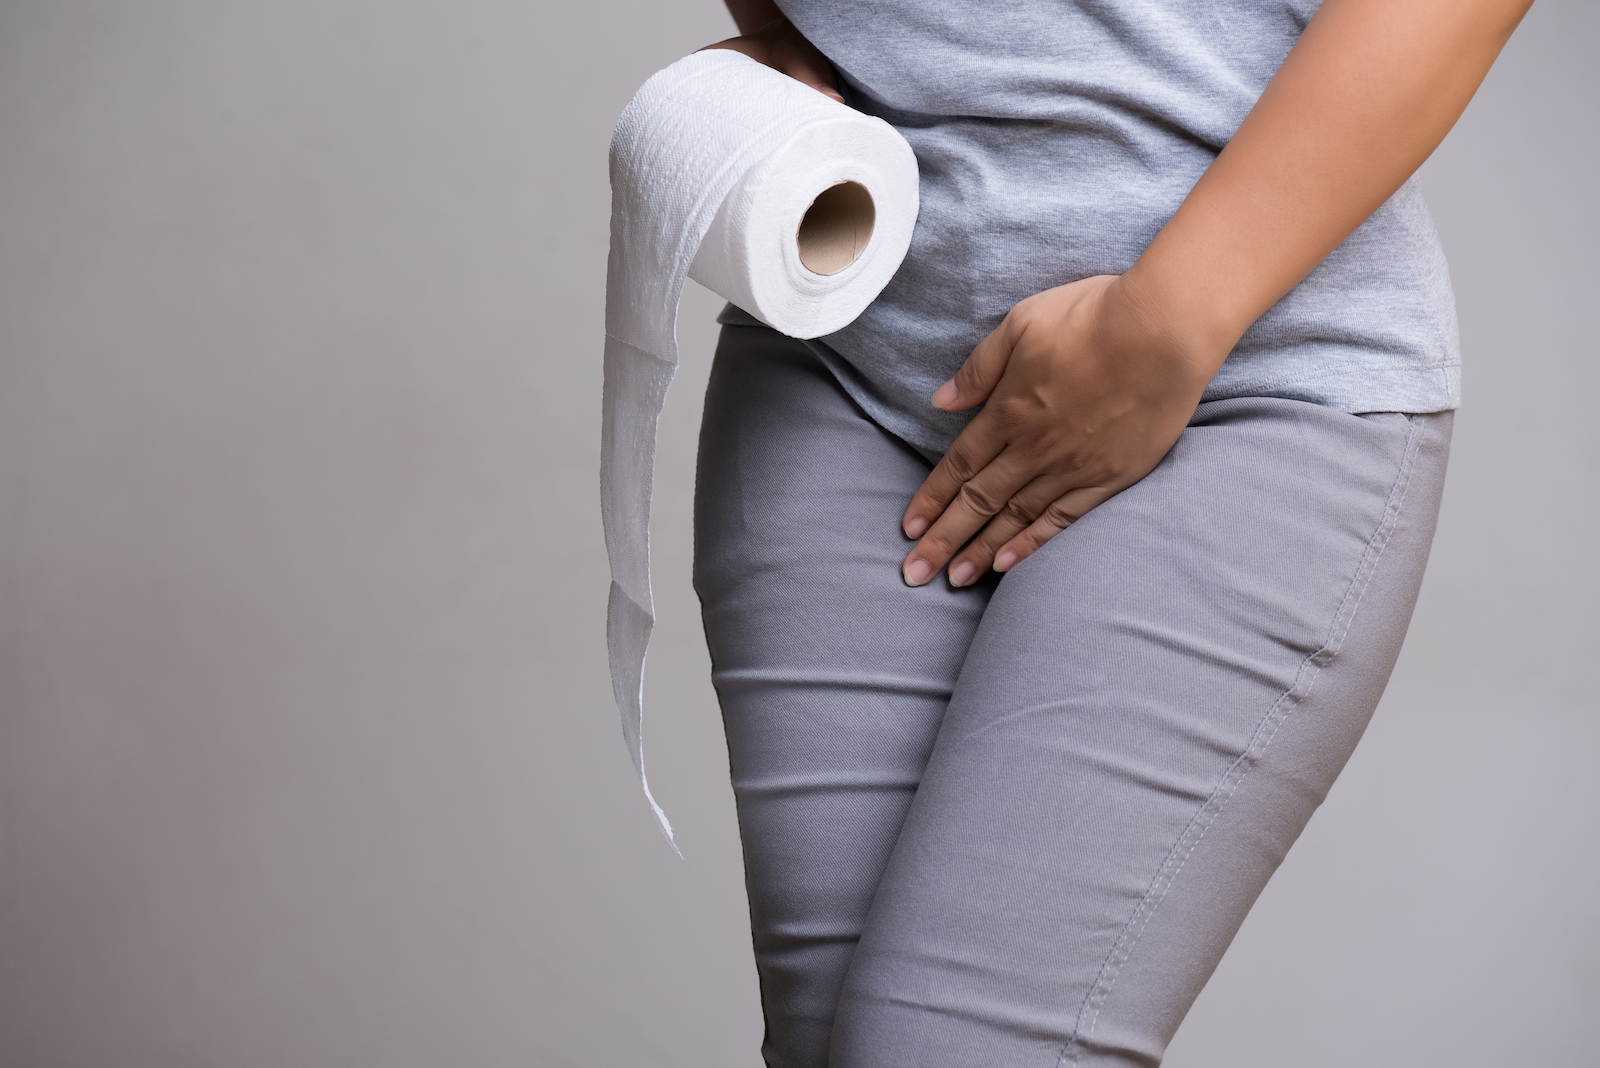 What Happens to Your Body When You Hold Your Pee?, by BananaLyfe